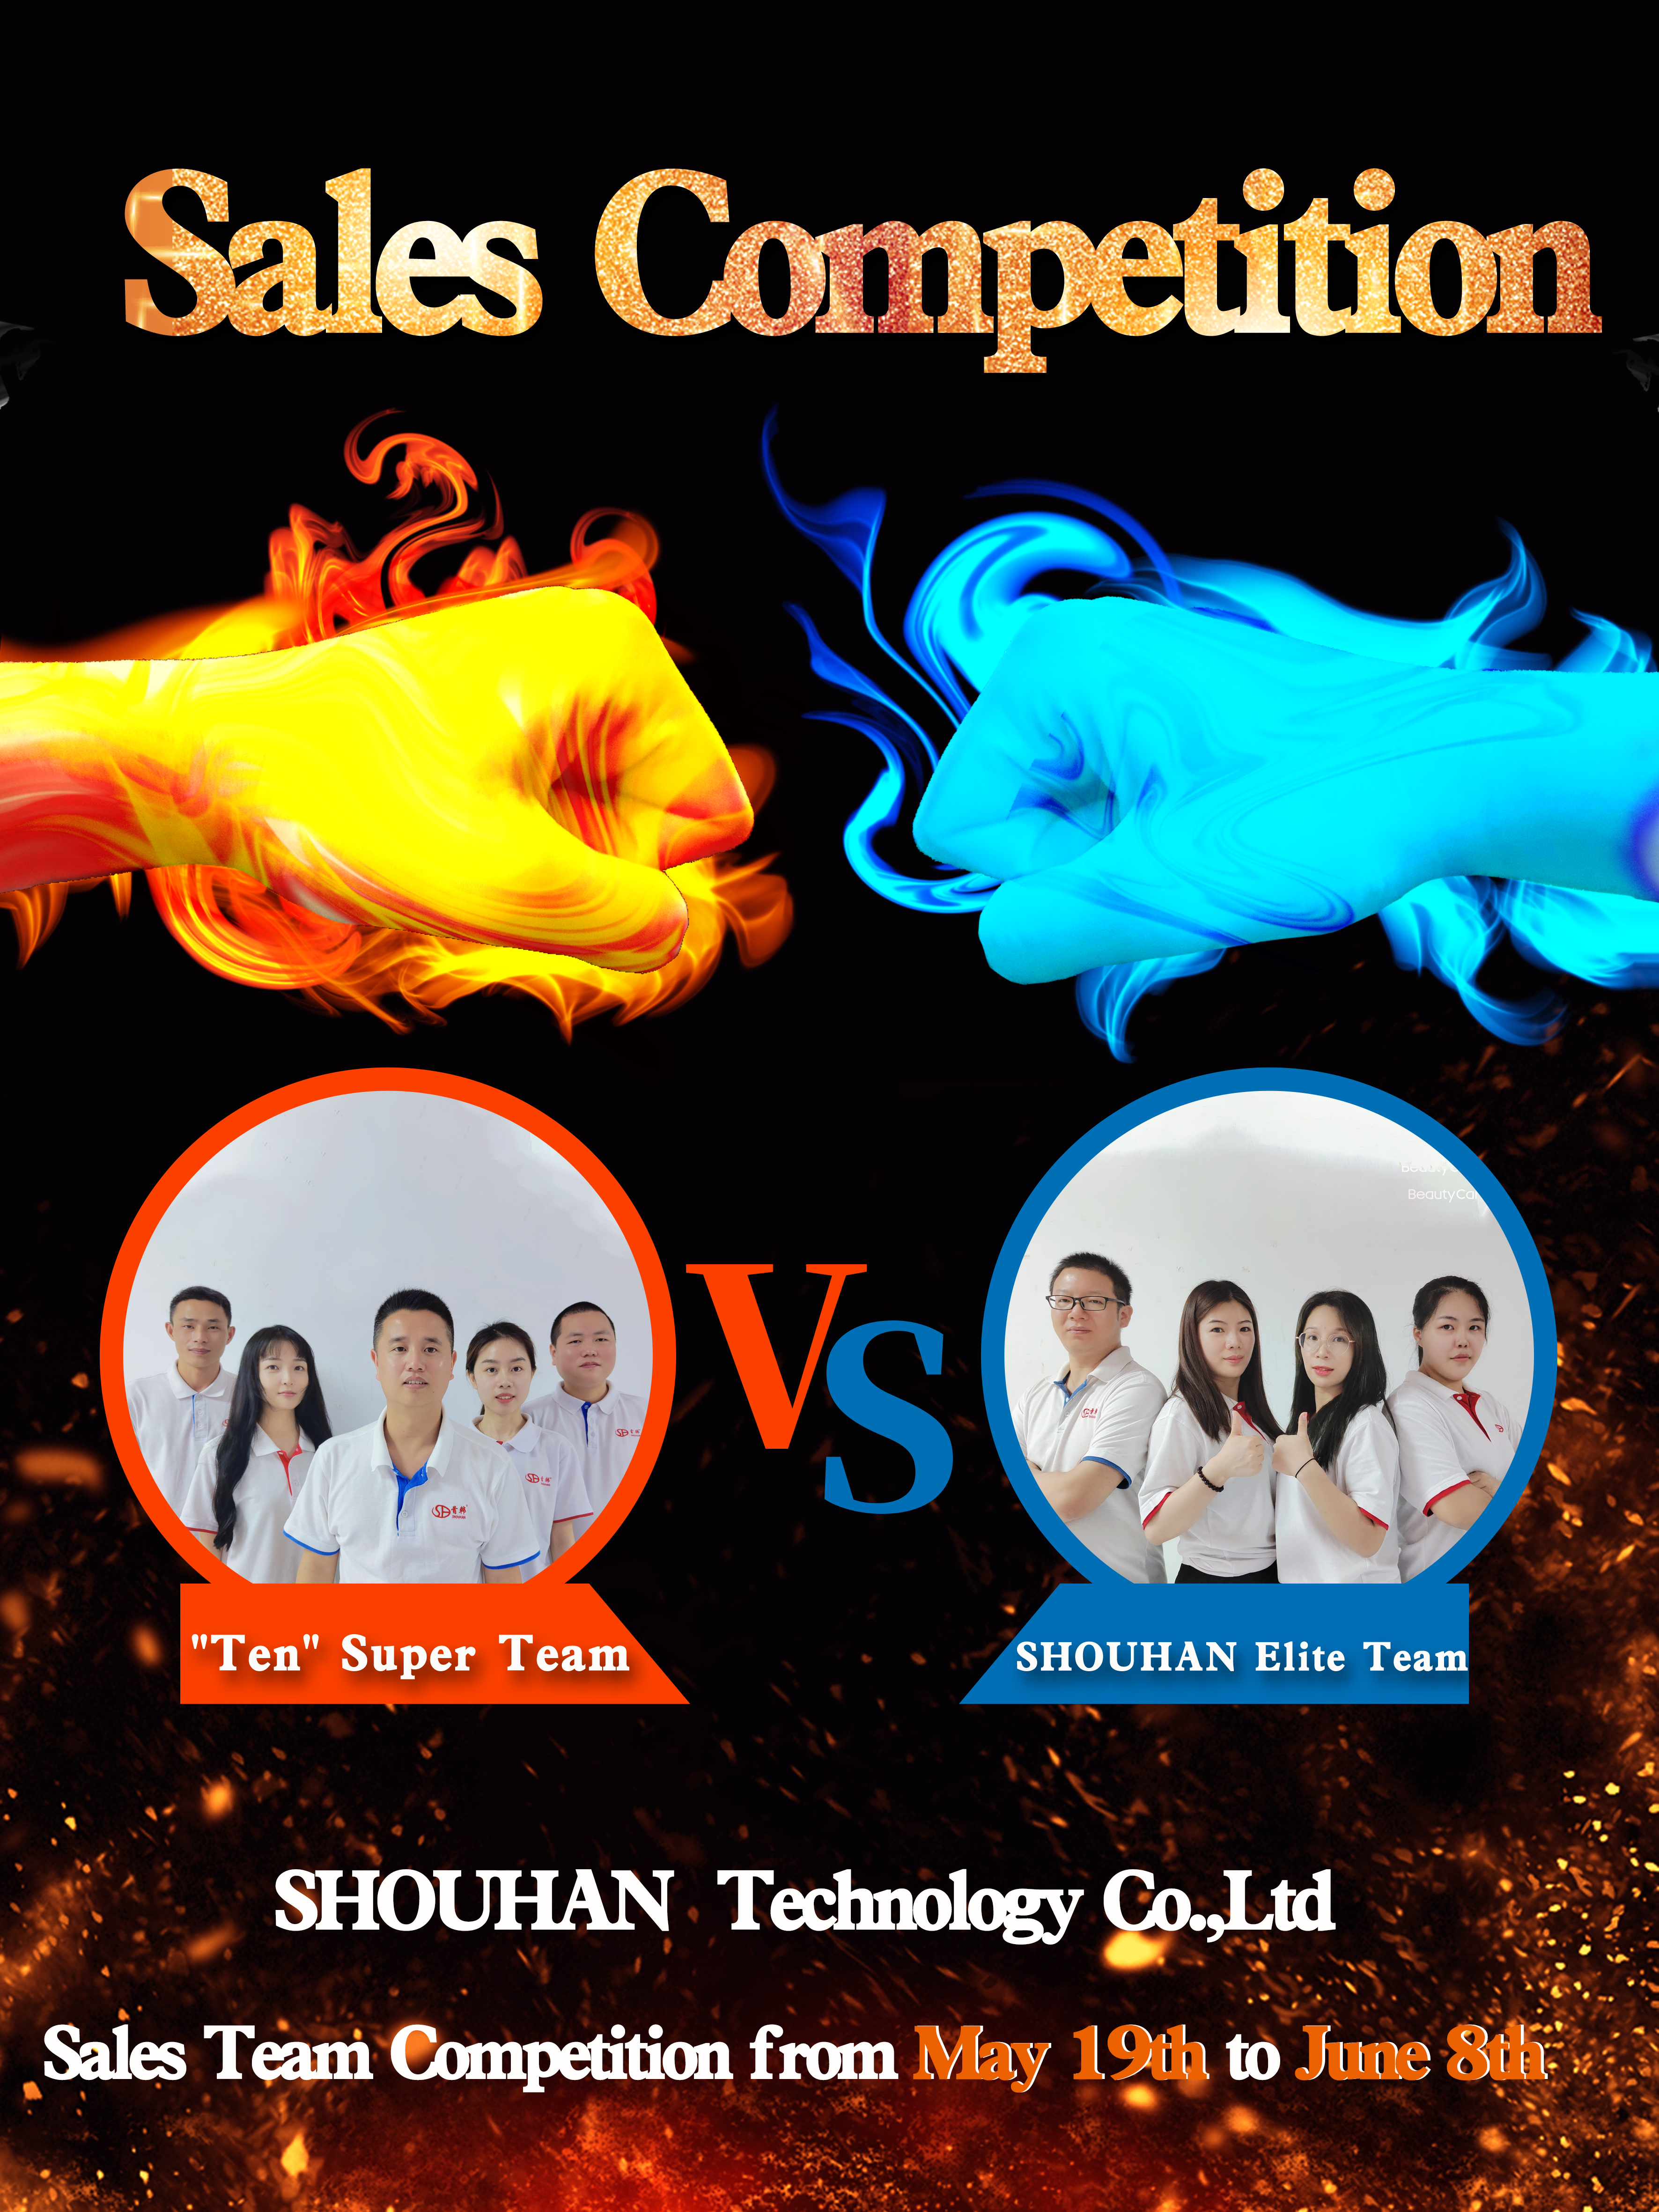 Shouhan Technology Co., Ltd, Sales Team Competition From May 19th to June 8th